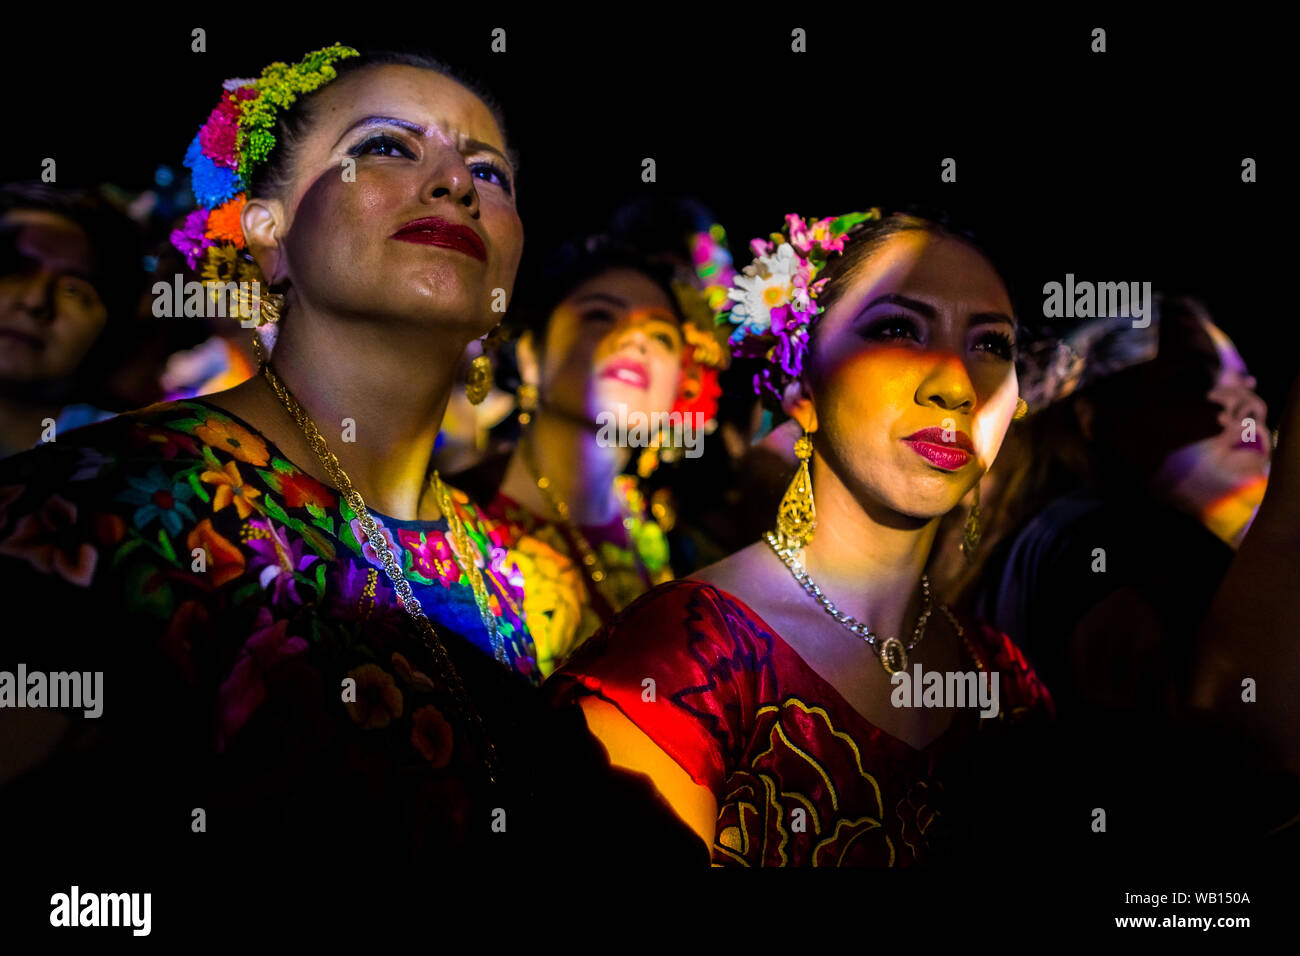 Mexican women of Zapotec origin, wearing traditional Tehuana dress, watch the party stage during the festival in Juchitán de Zaragoza, Mexico. Stock Photo